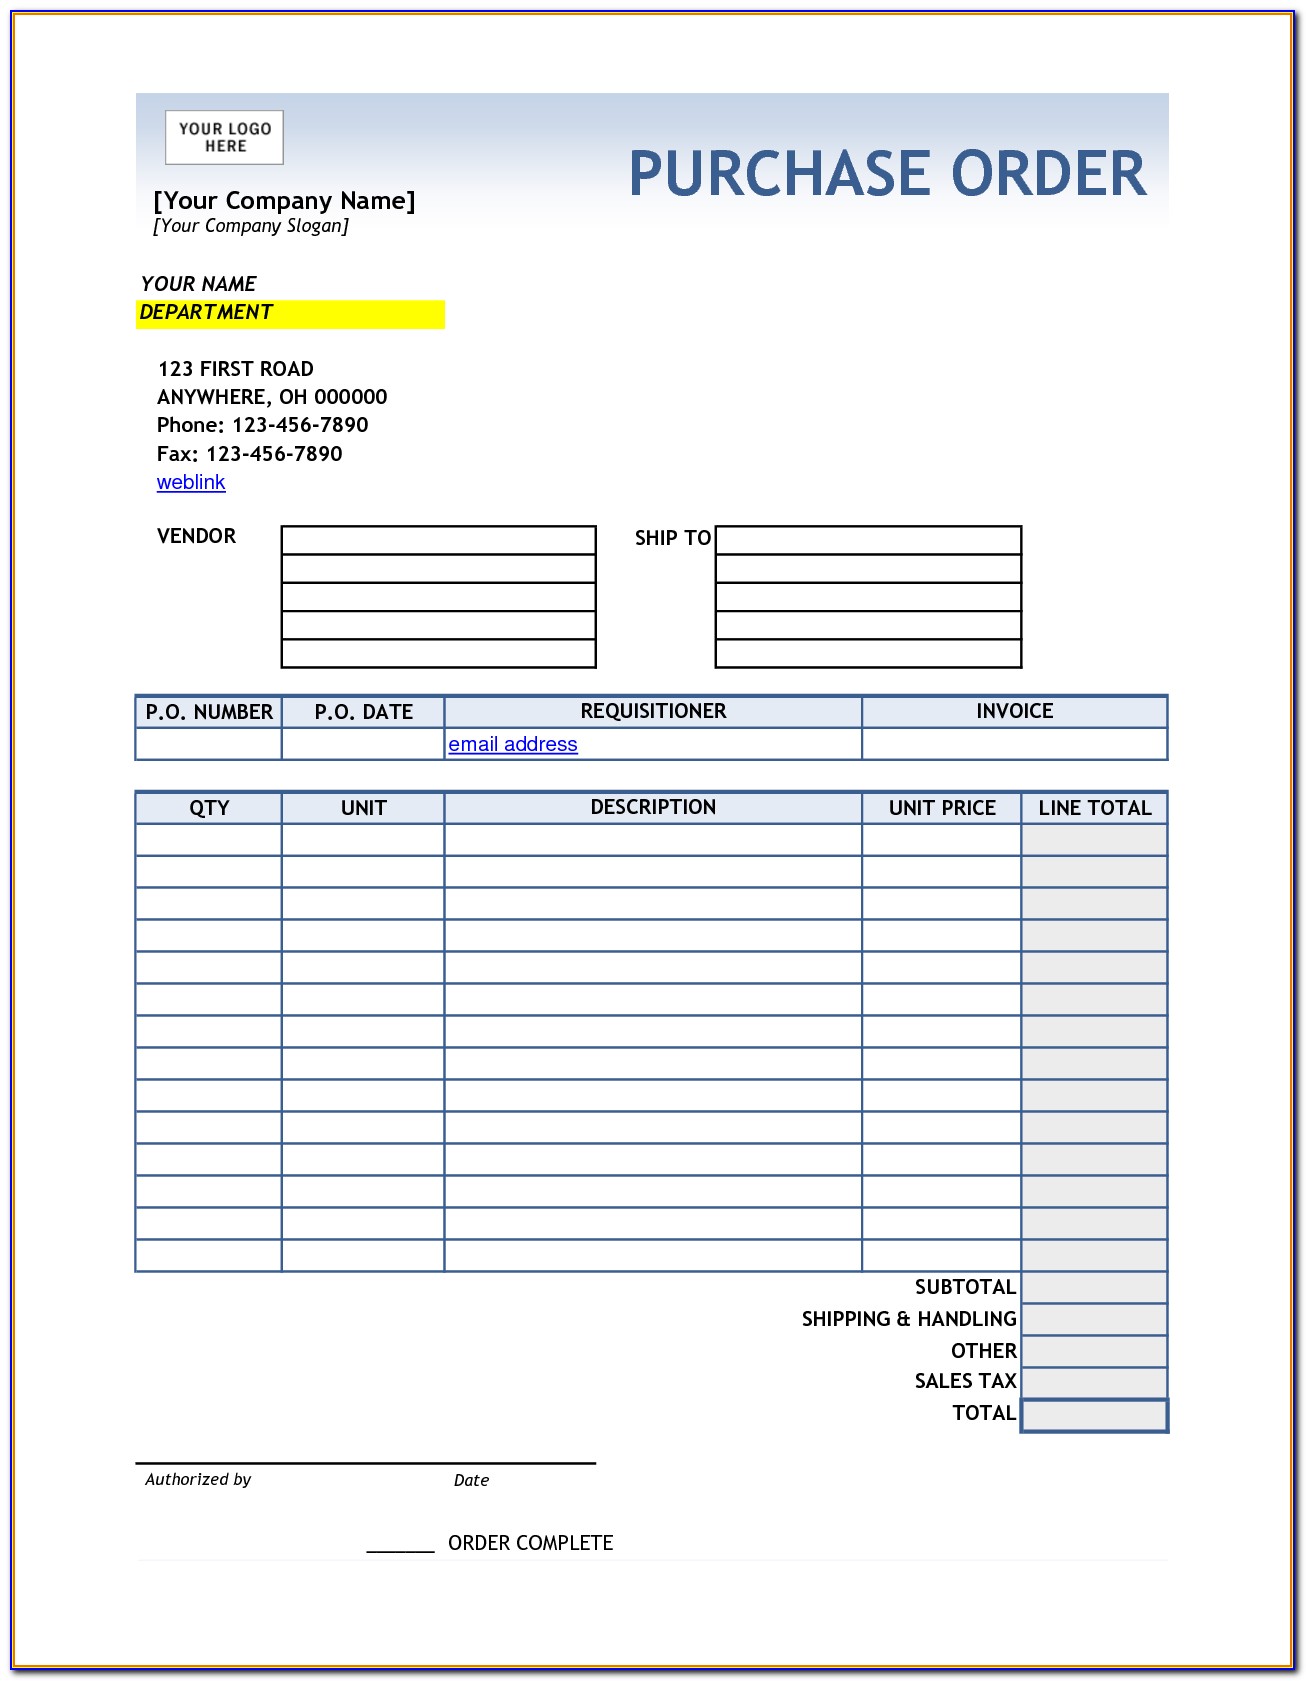 Purchase Order Form Sample Free Download